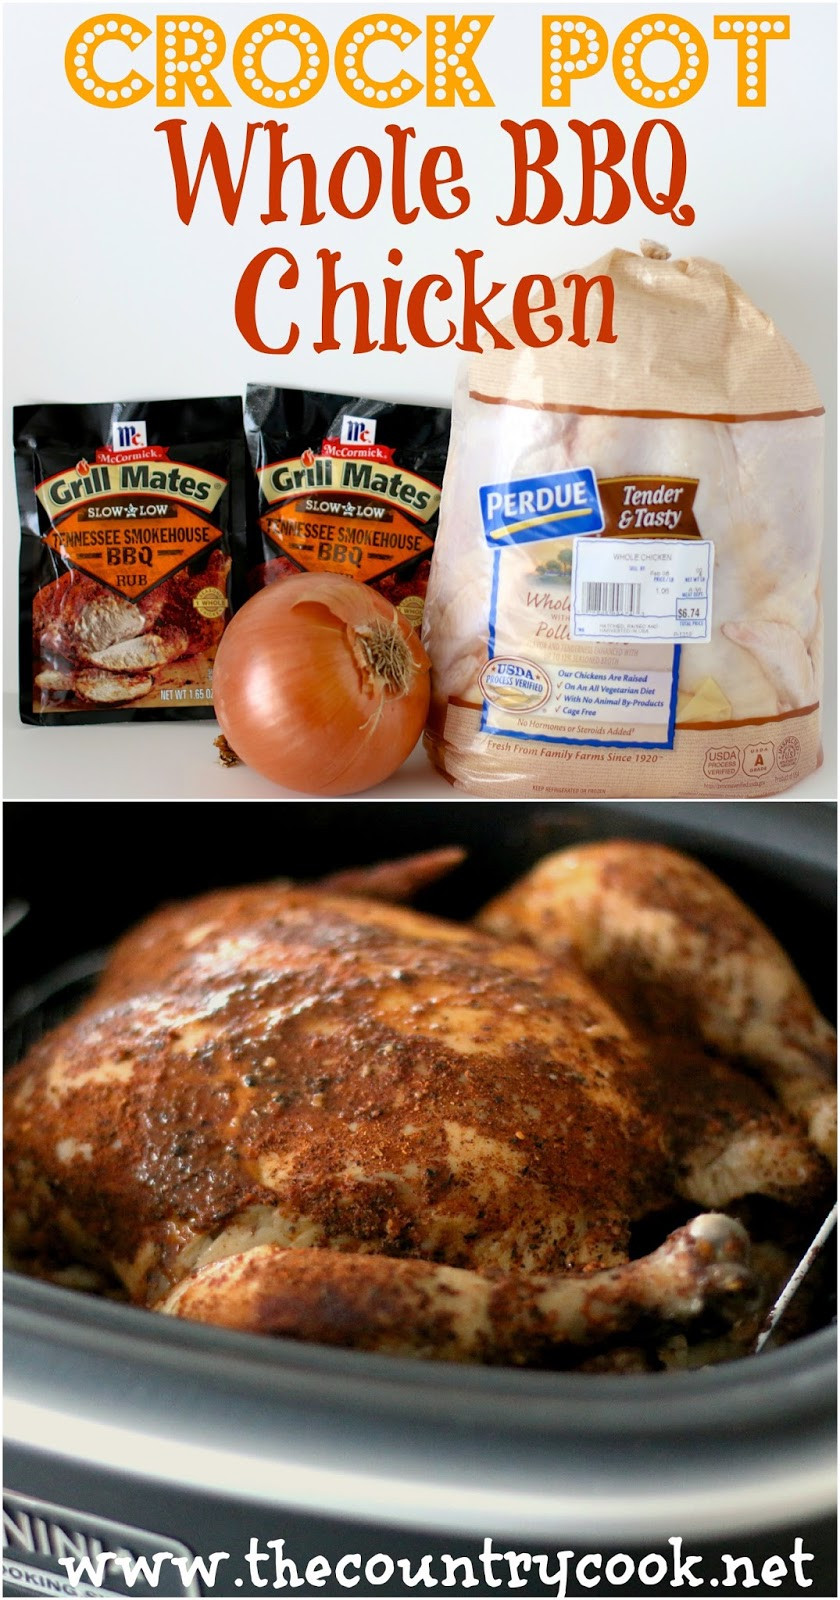 Cooking A Whole Chicken In A Crock Pot
 The Country Cook Crock Pot Whole BBQ Chicken